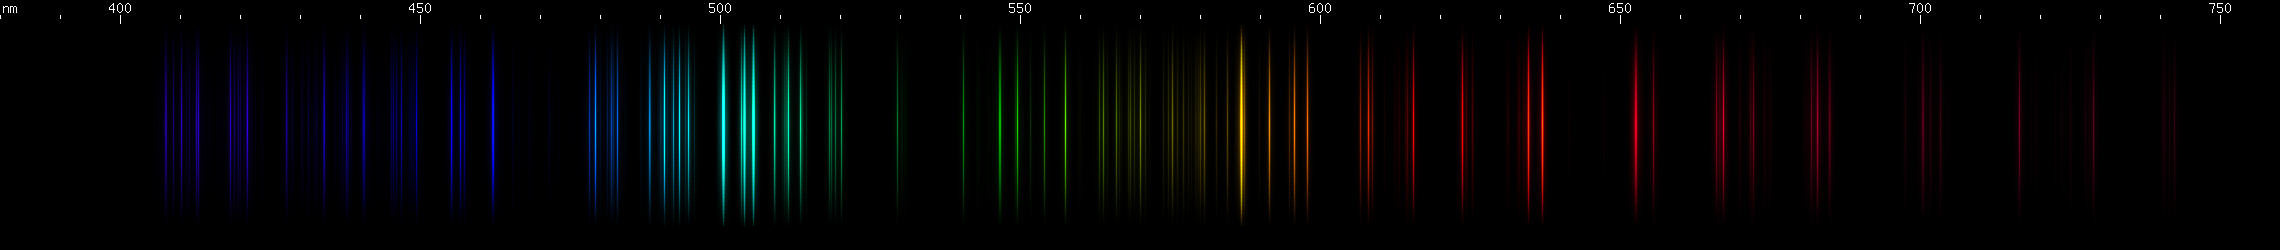 Spectral lines of Silicon.